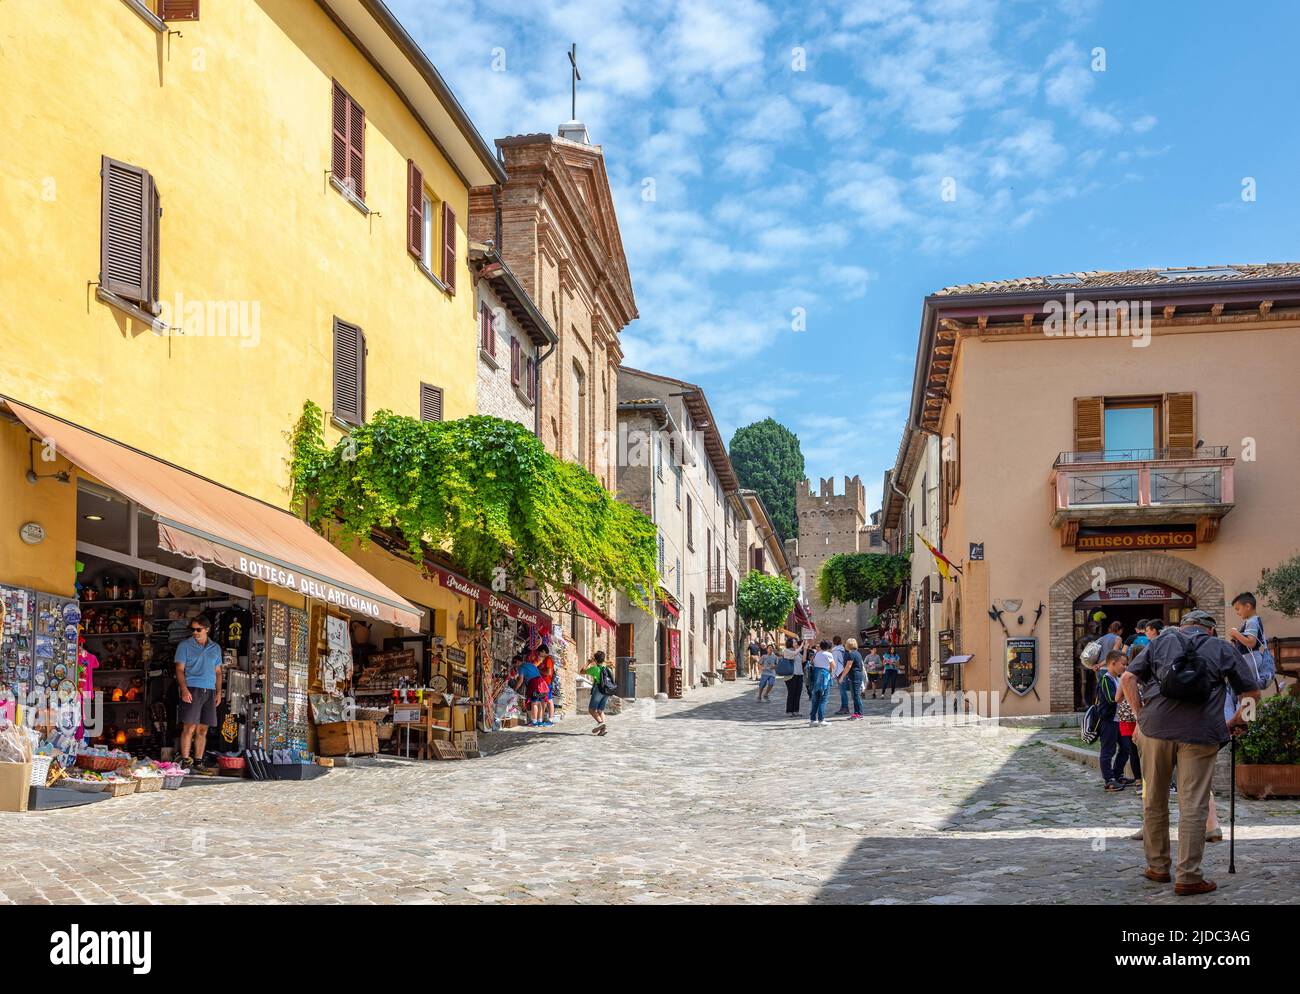 Gradara, Italy - May 29, 2018: Tourists in the main square of the village Stock Photo